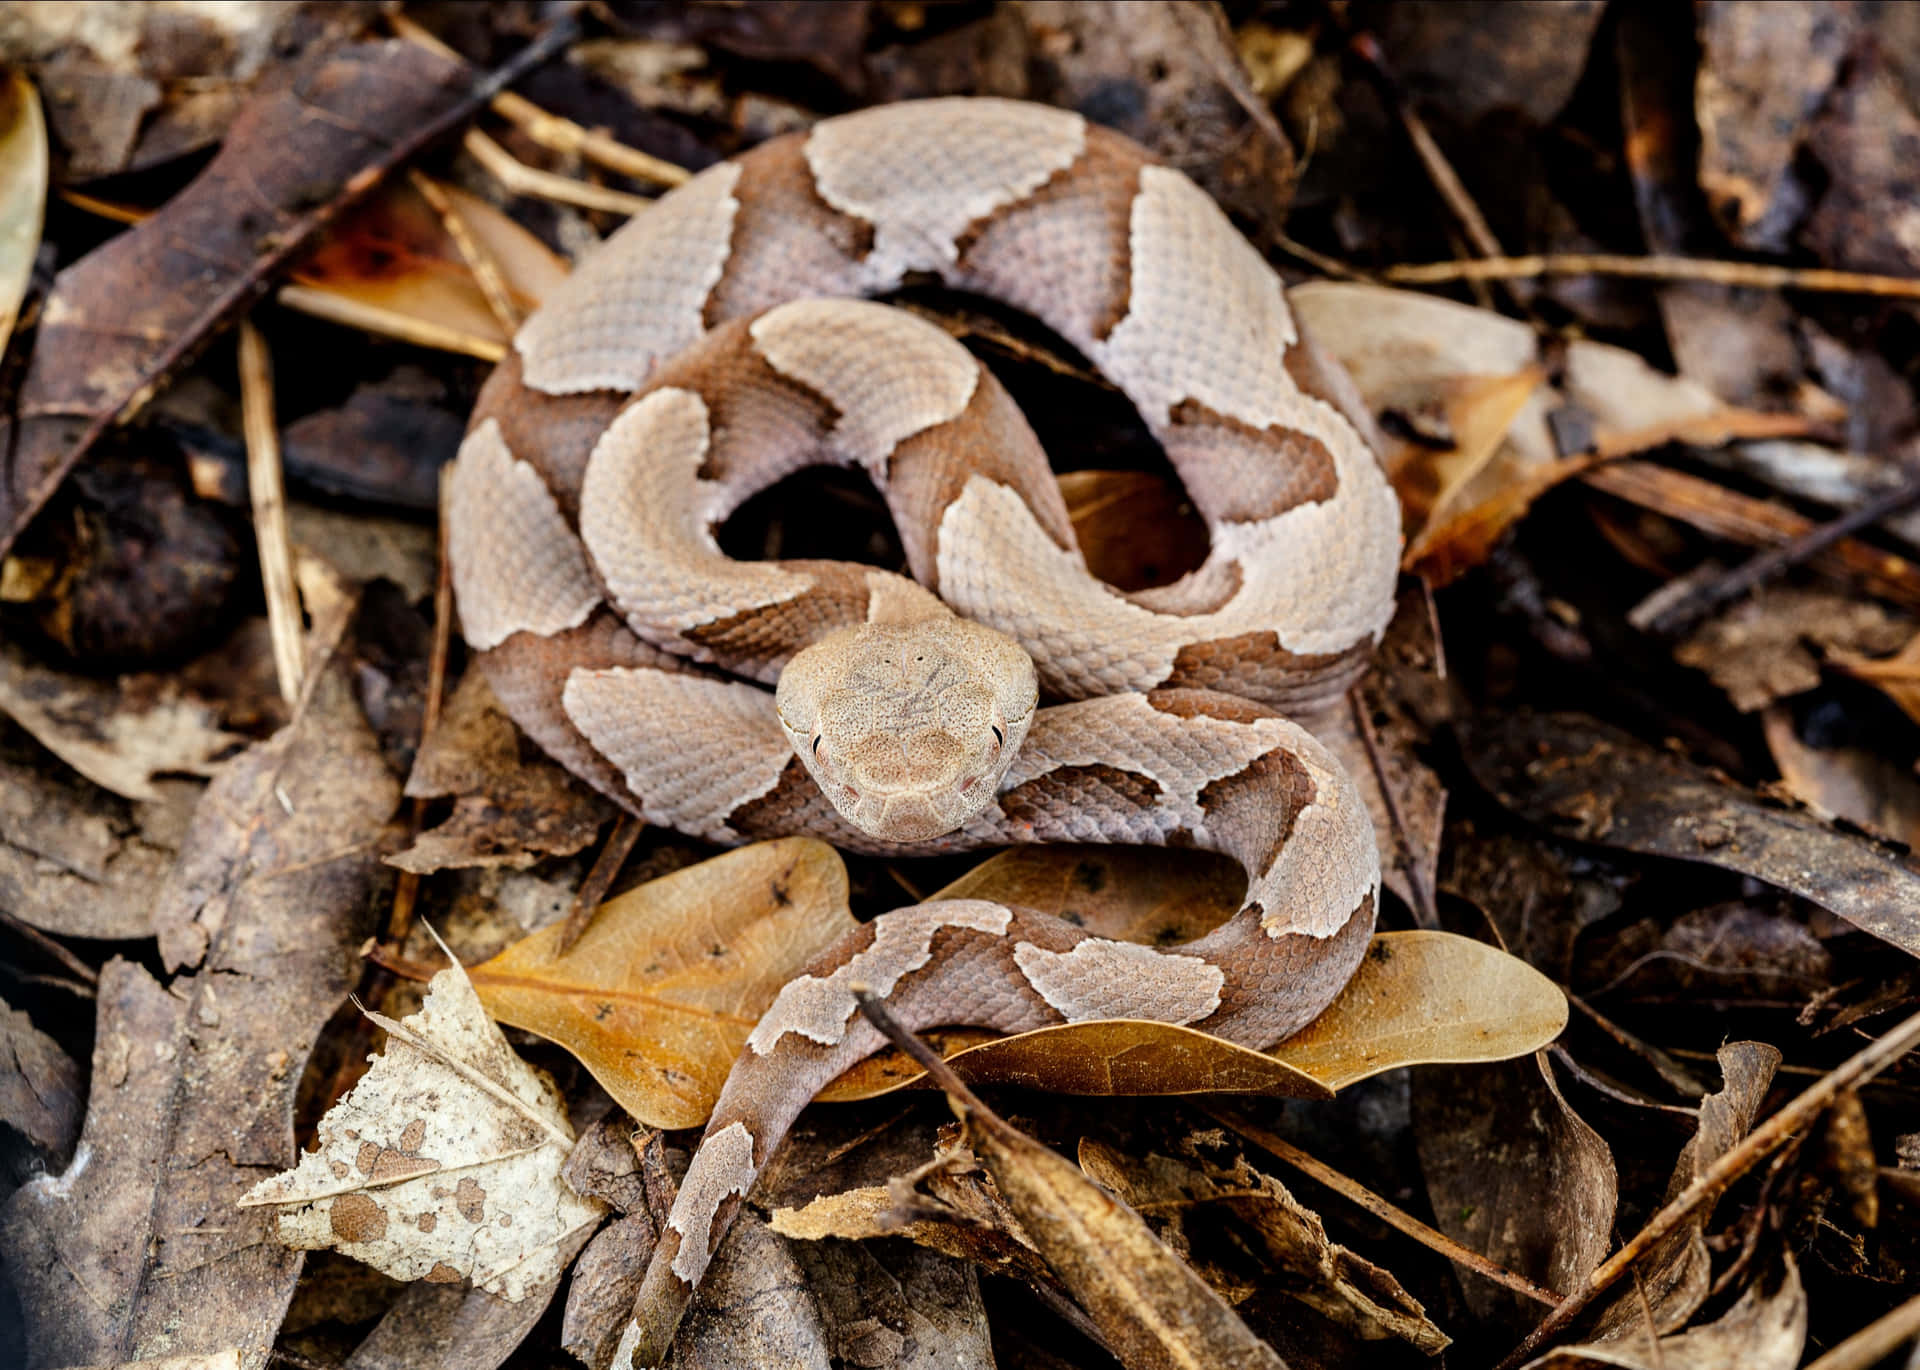 A Copperhead Snake slithers across a rocky pathway